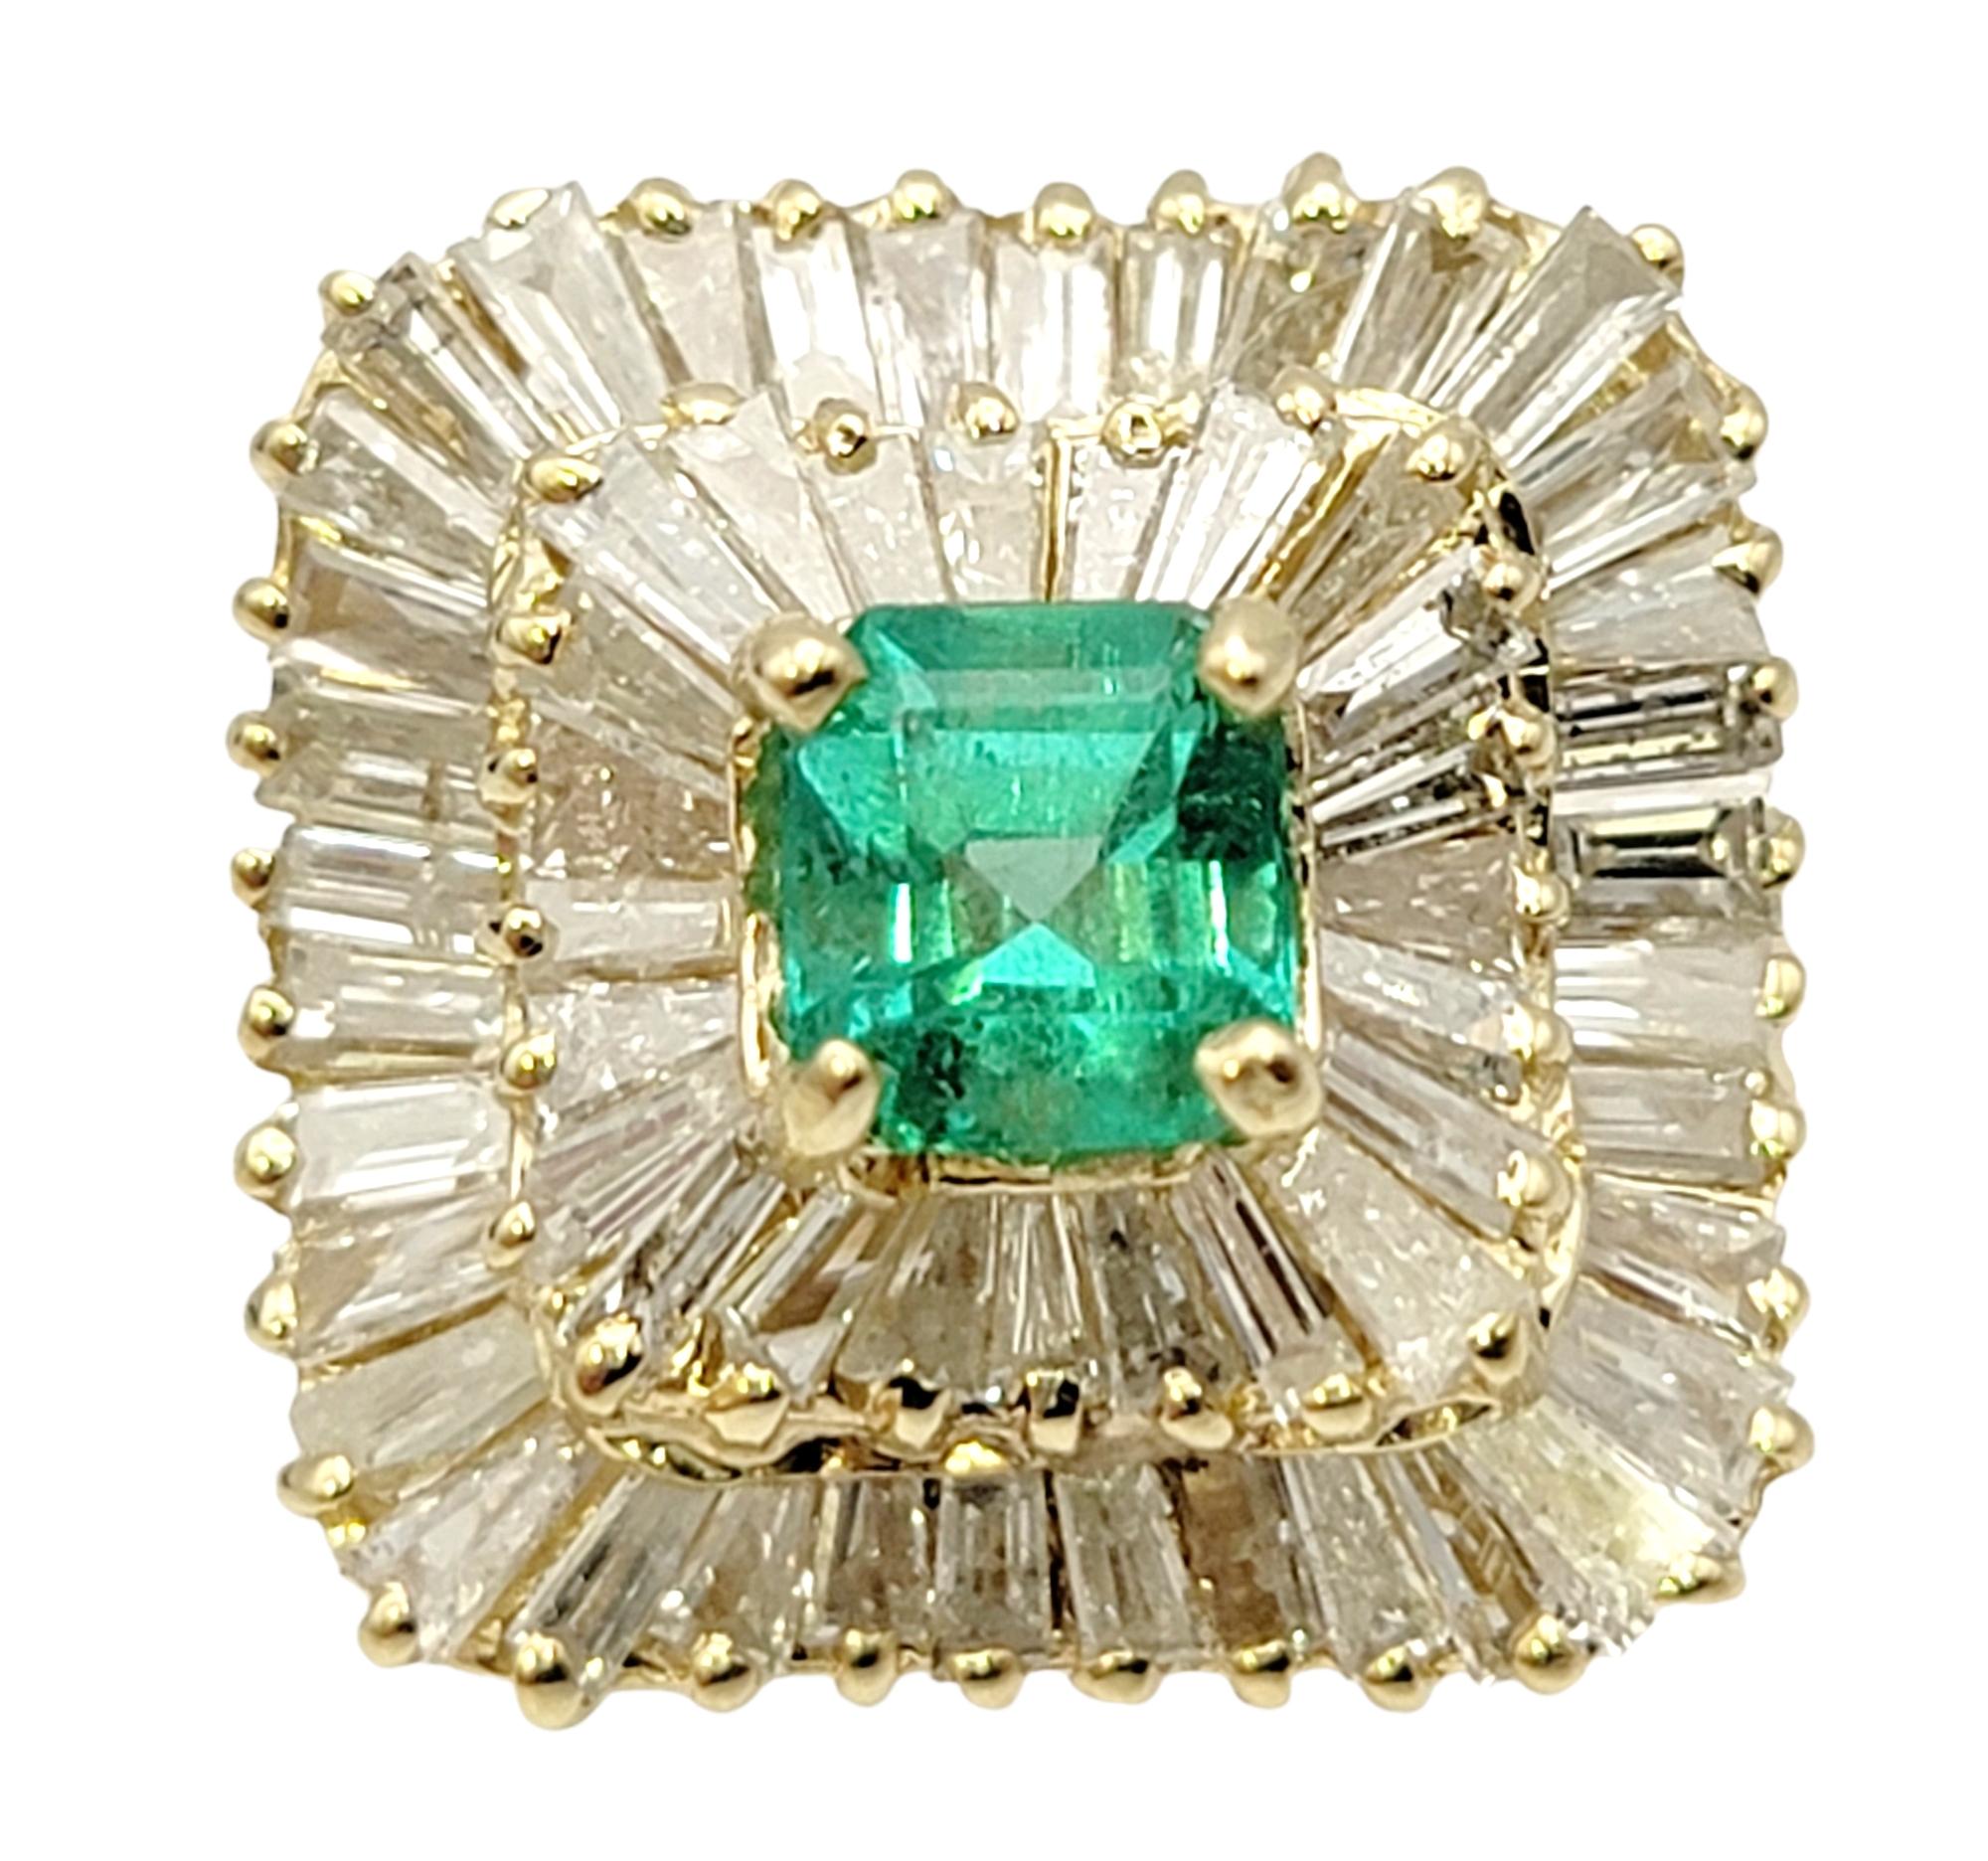 Ring size: 6

This stunning emerald and diamond cocktail ring is the absolute epitome of elegance. It features a single square emerald cut natural emerald in a stunning bright green color, four prong set at the center of the piece. A double halo of